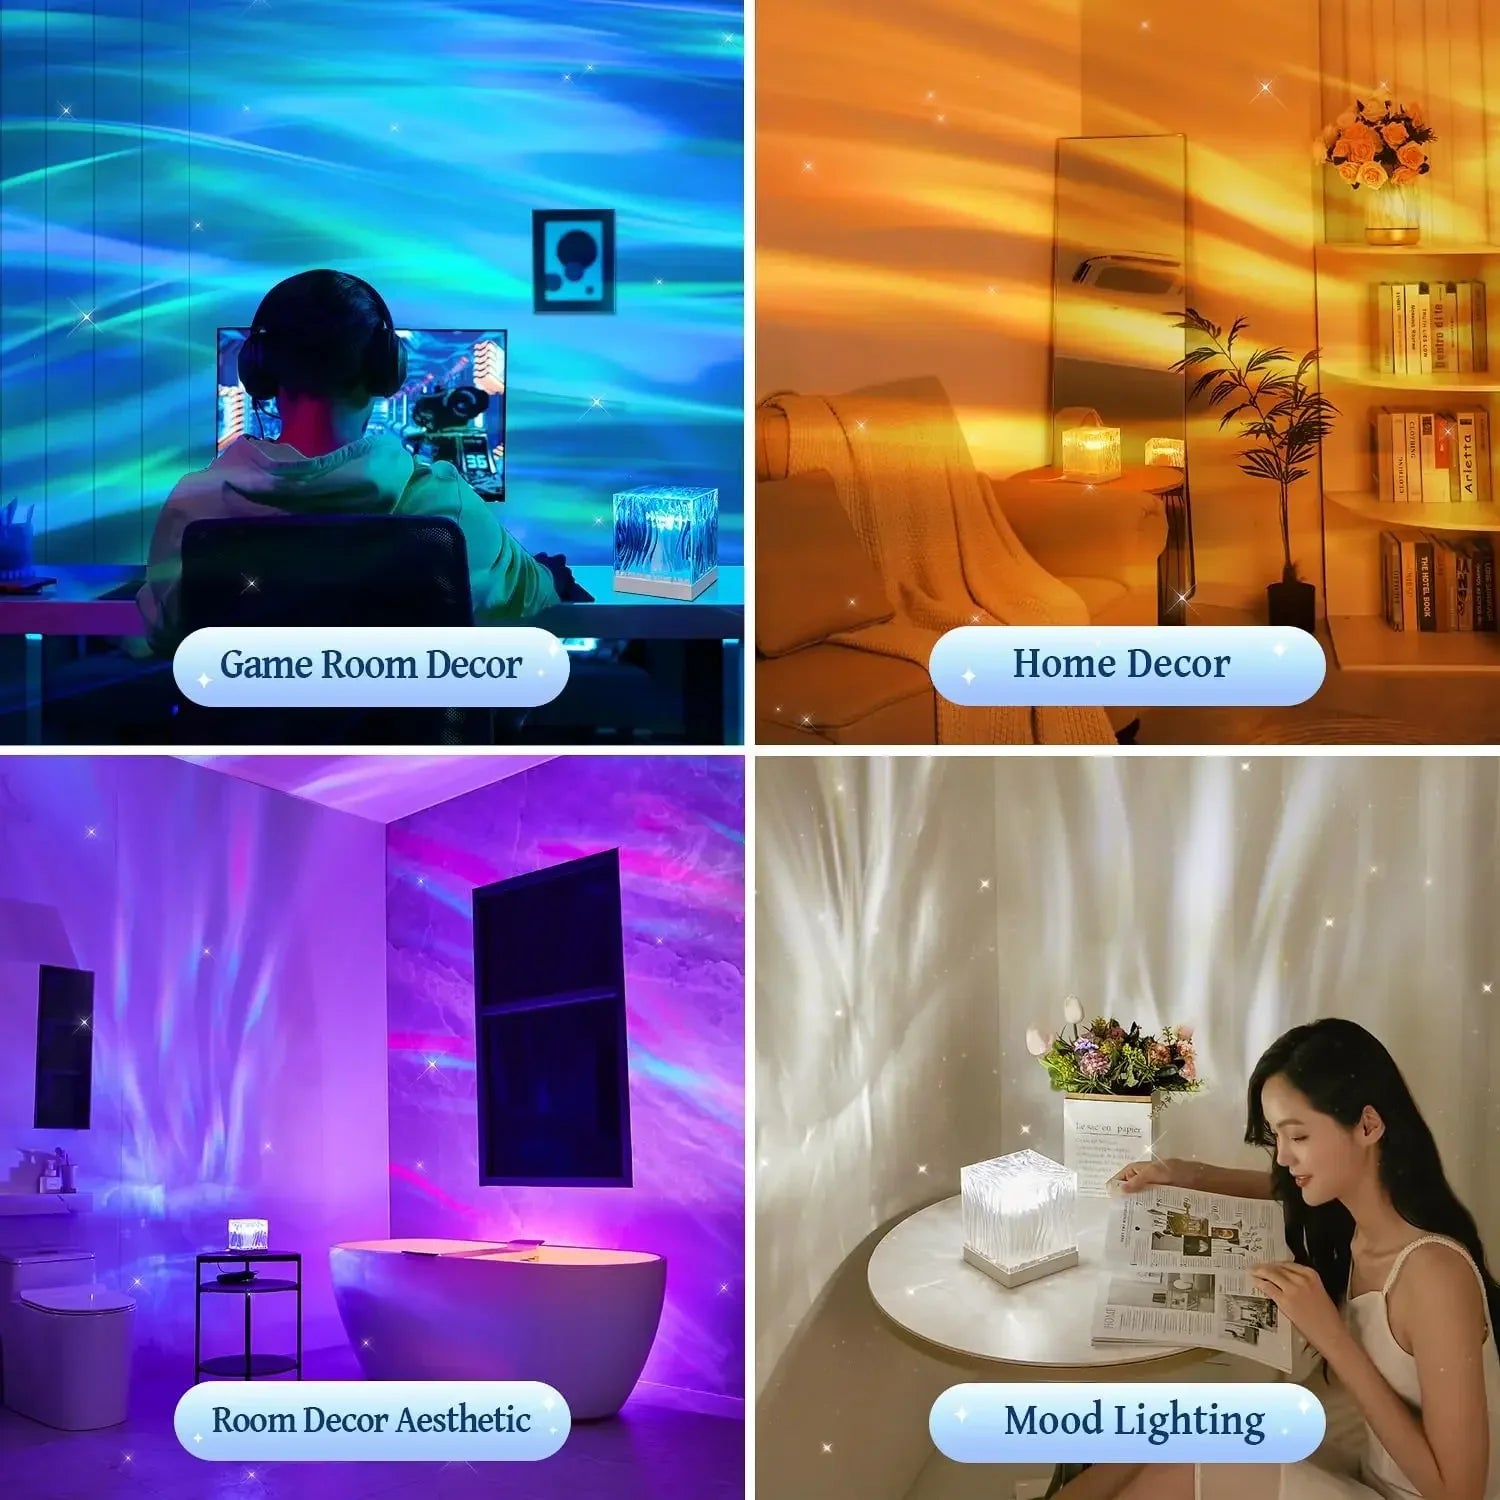 Aurora Northern Lights Projector | Relaxing Night Light | Sleep & Stress Relief Aid | 17 Color Modes